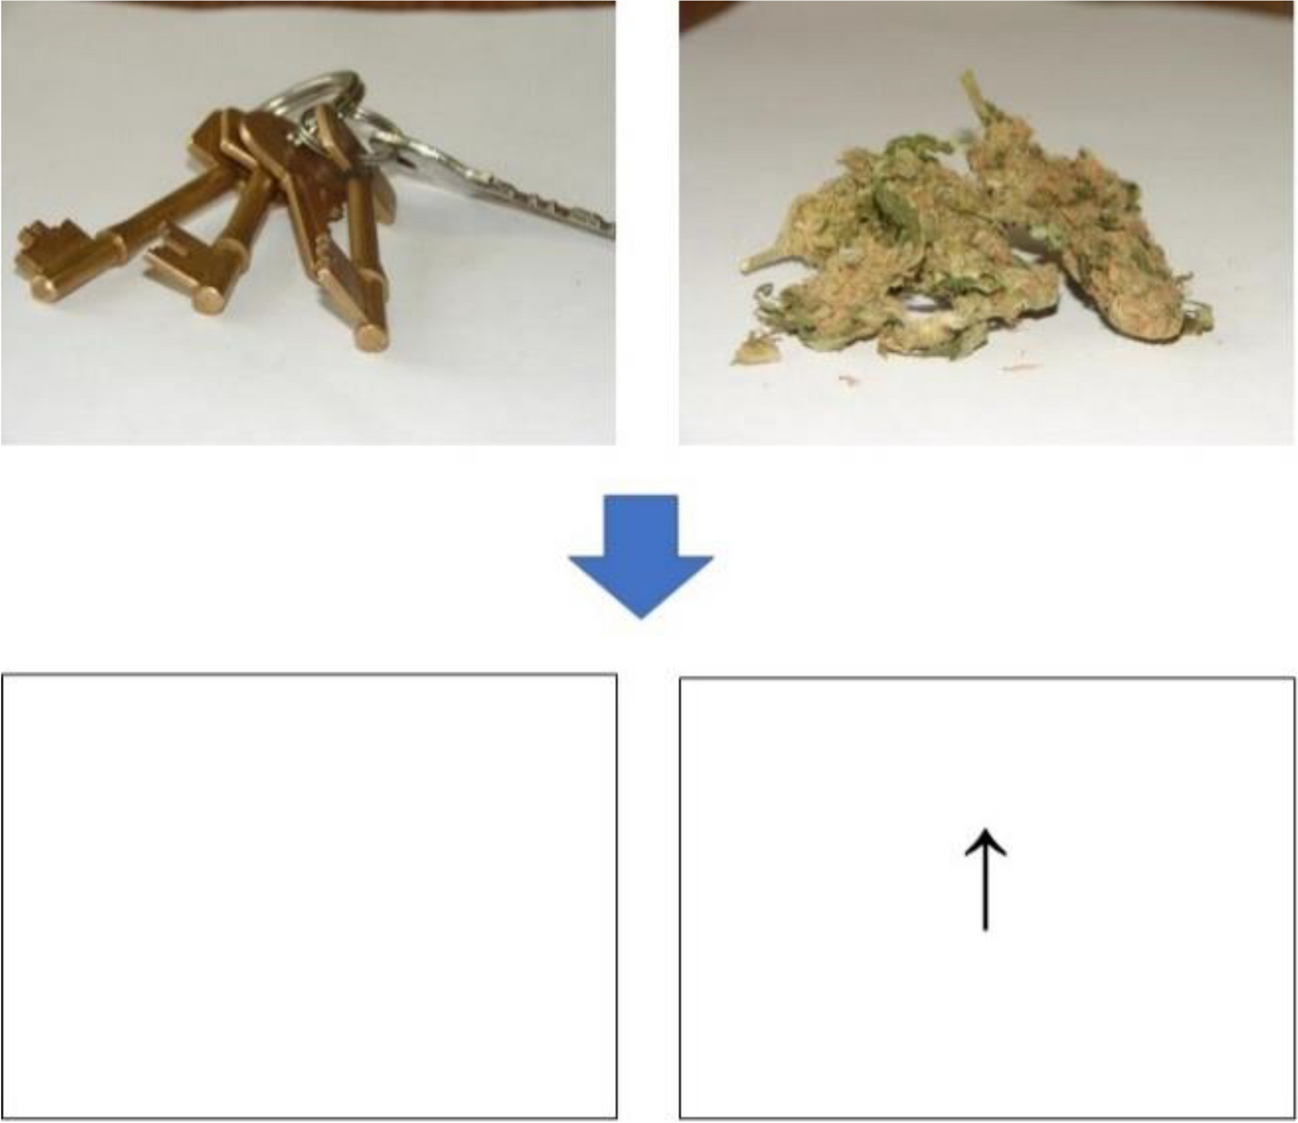 The acute effects of cannabis, with and without cannabidiol, on attentional bias to cannabis related cues: a randomised, double-blind, placebo-controlled, cross-over study